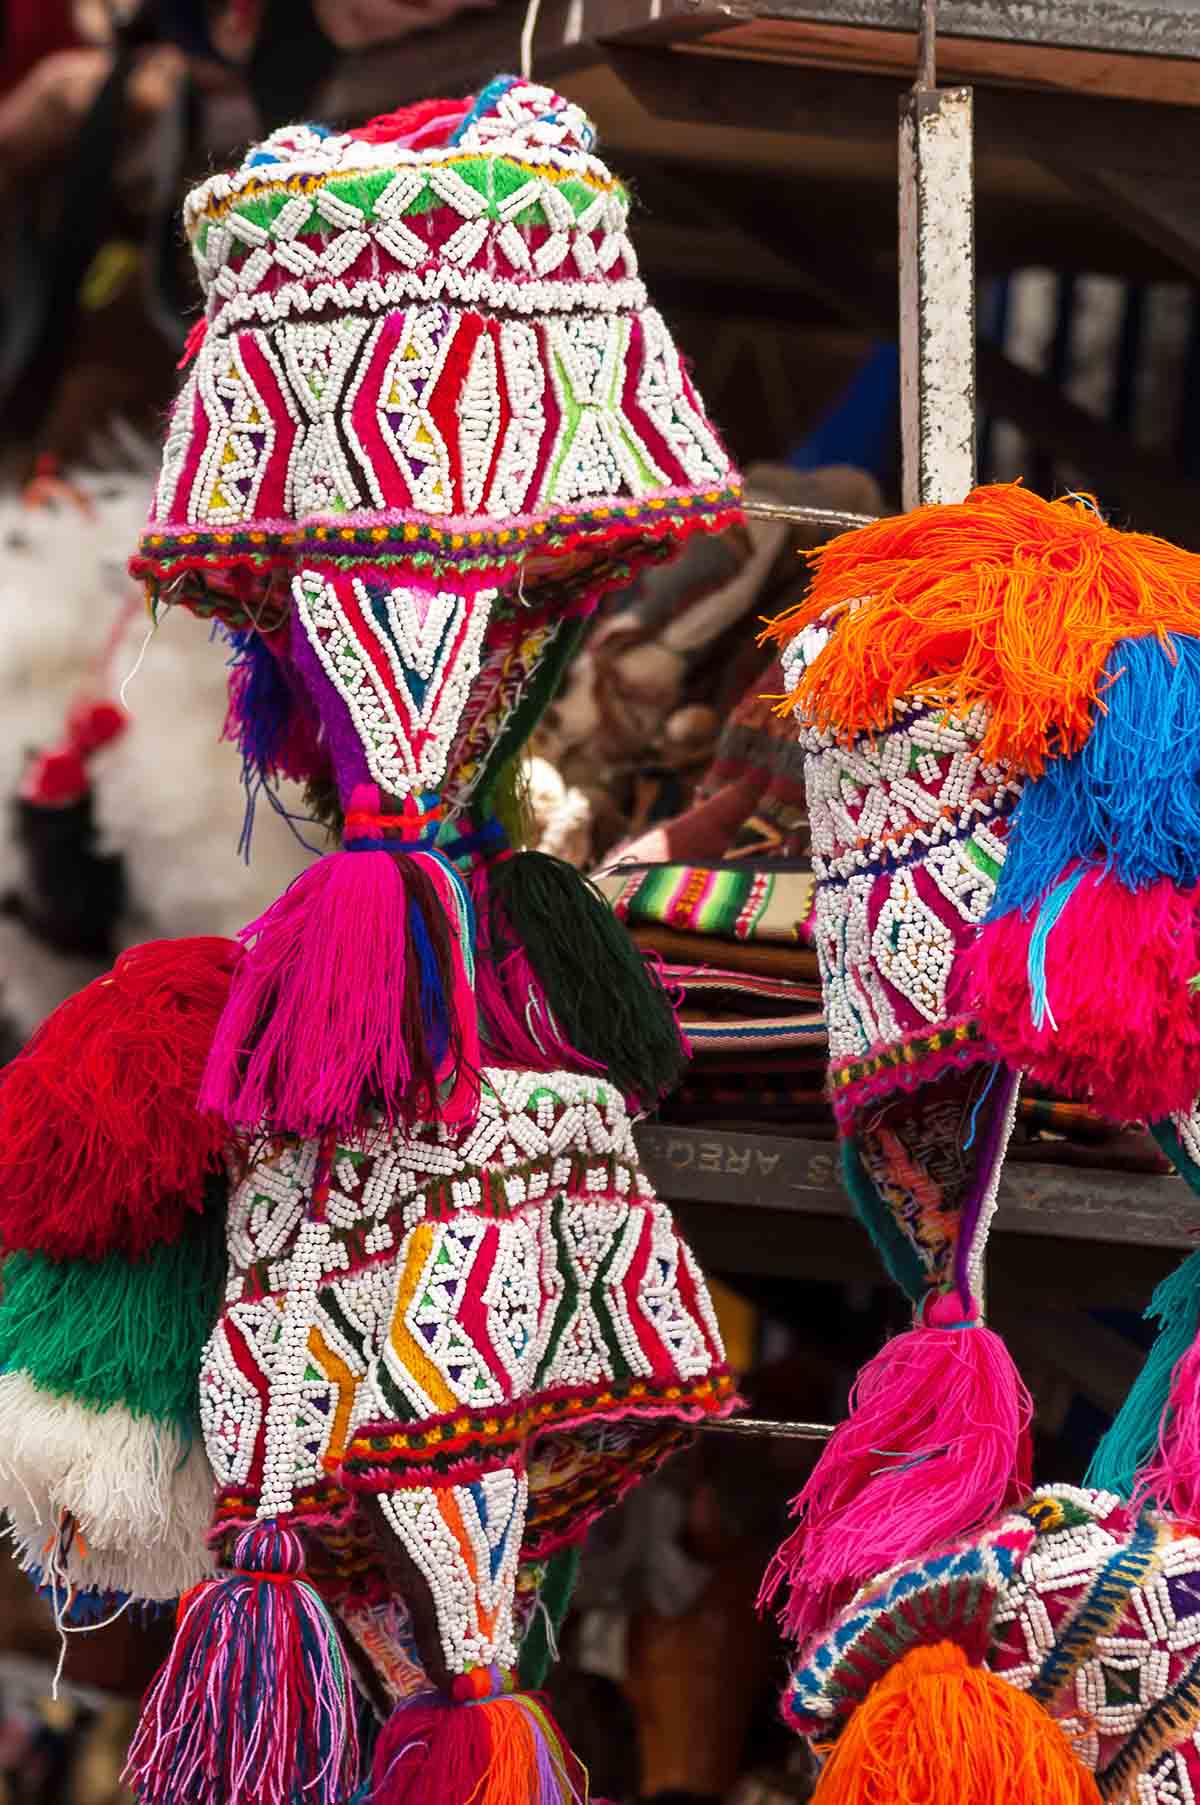 Bright red, yellow, and green chullos with white beading and tassels.